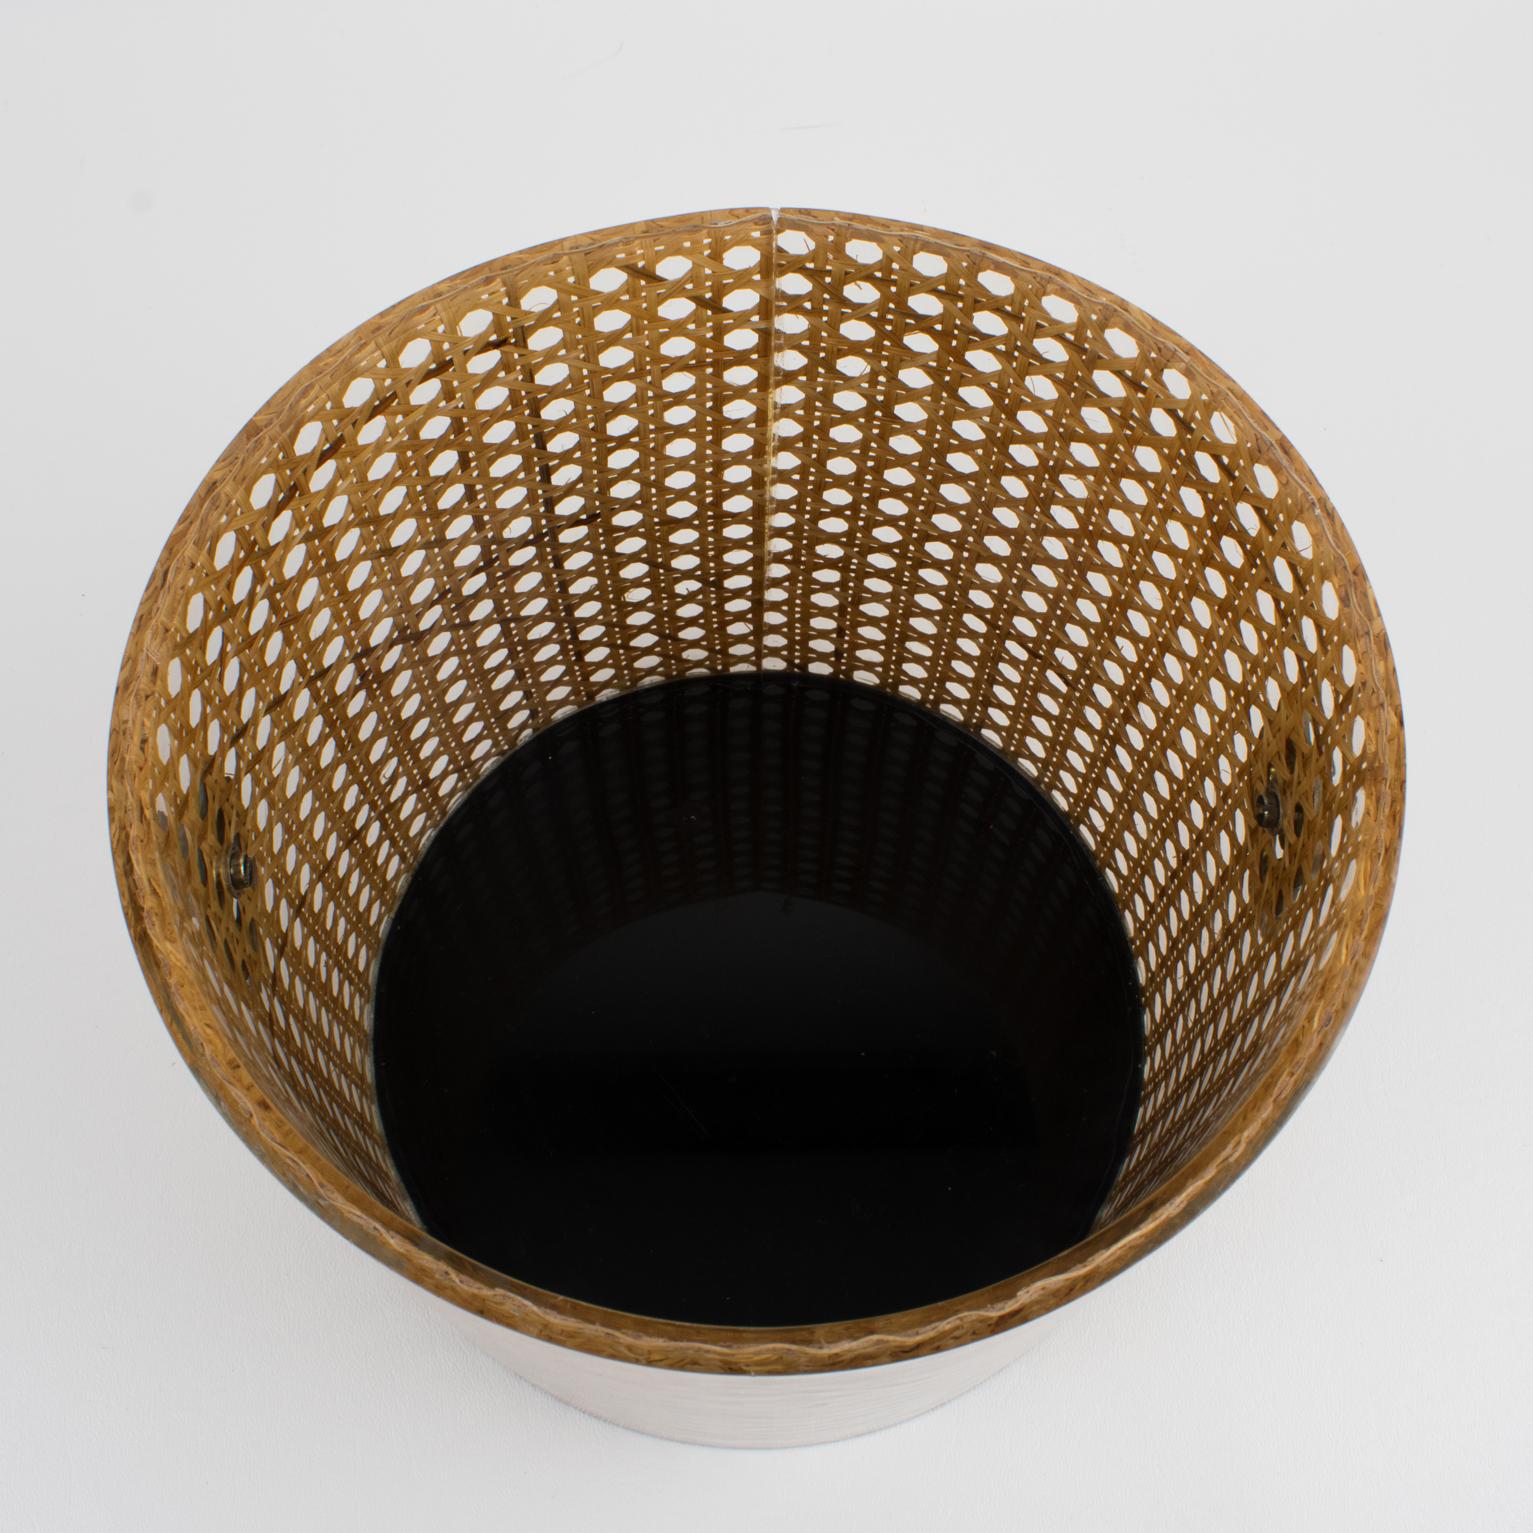 Late 20th Century Christian Dior Home Collection 1970s Lucite and Rattan Waste Basket or Planter